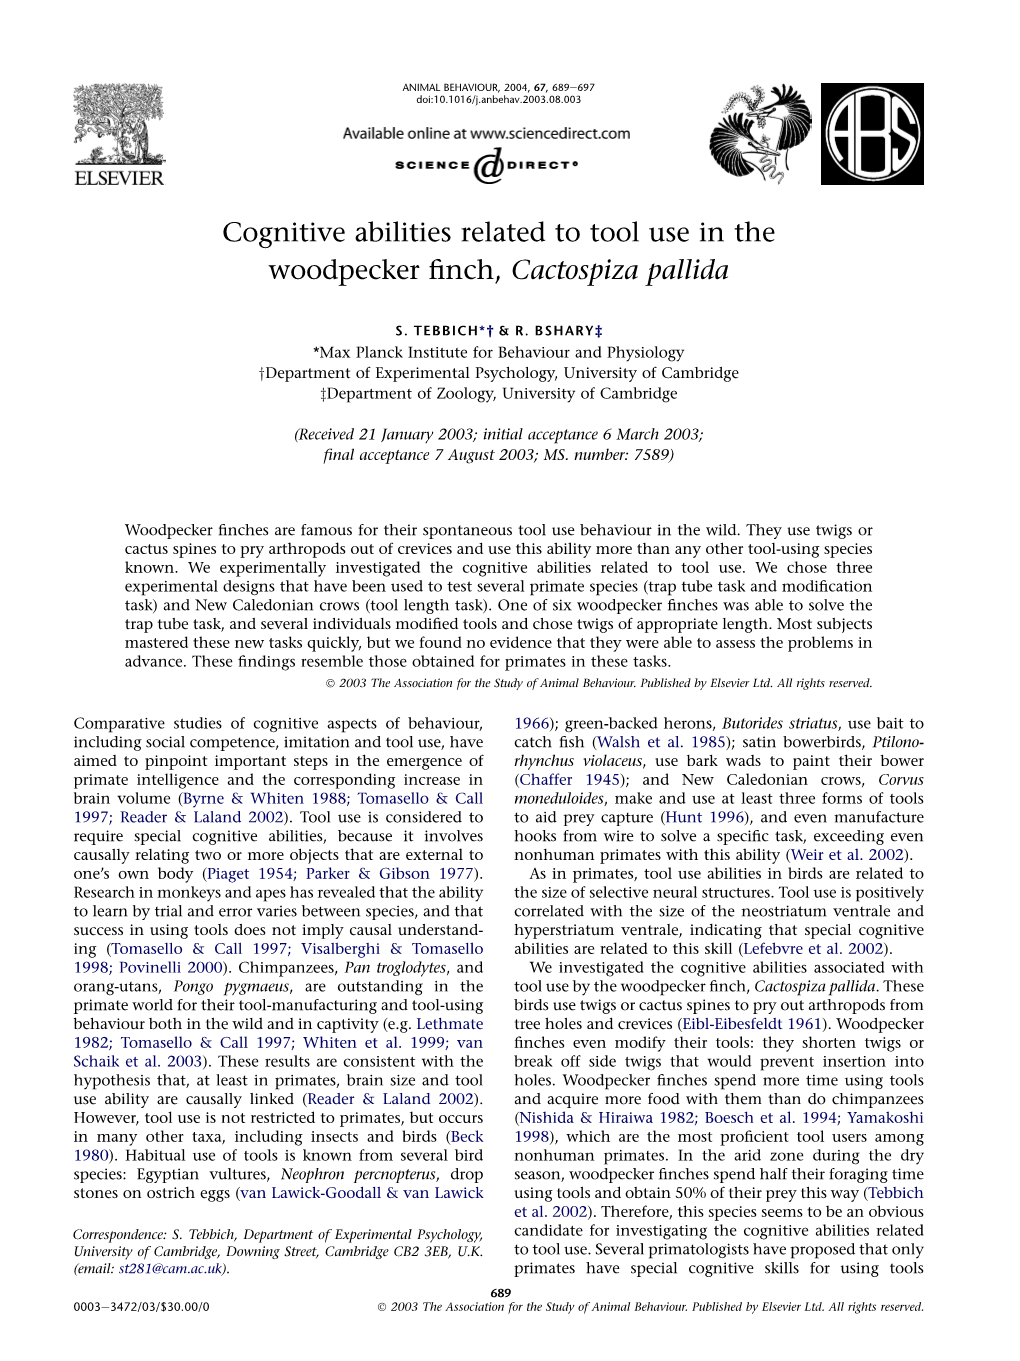 Cognitive Abilities Related to Tool Use in the Woodpecker Finch